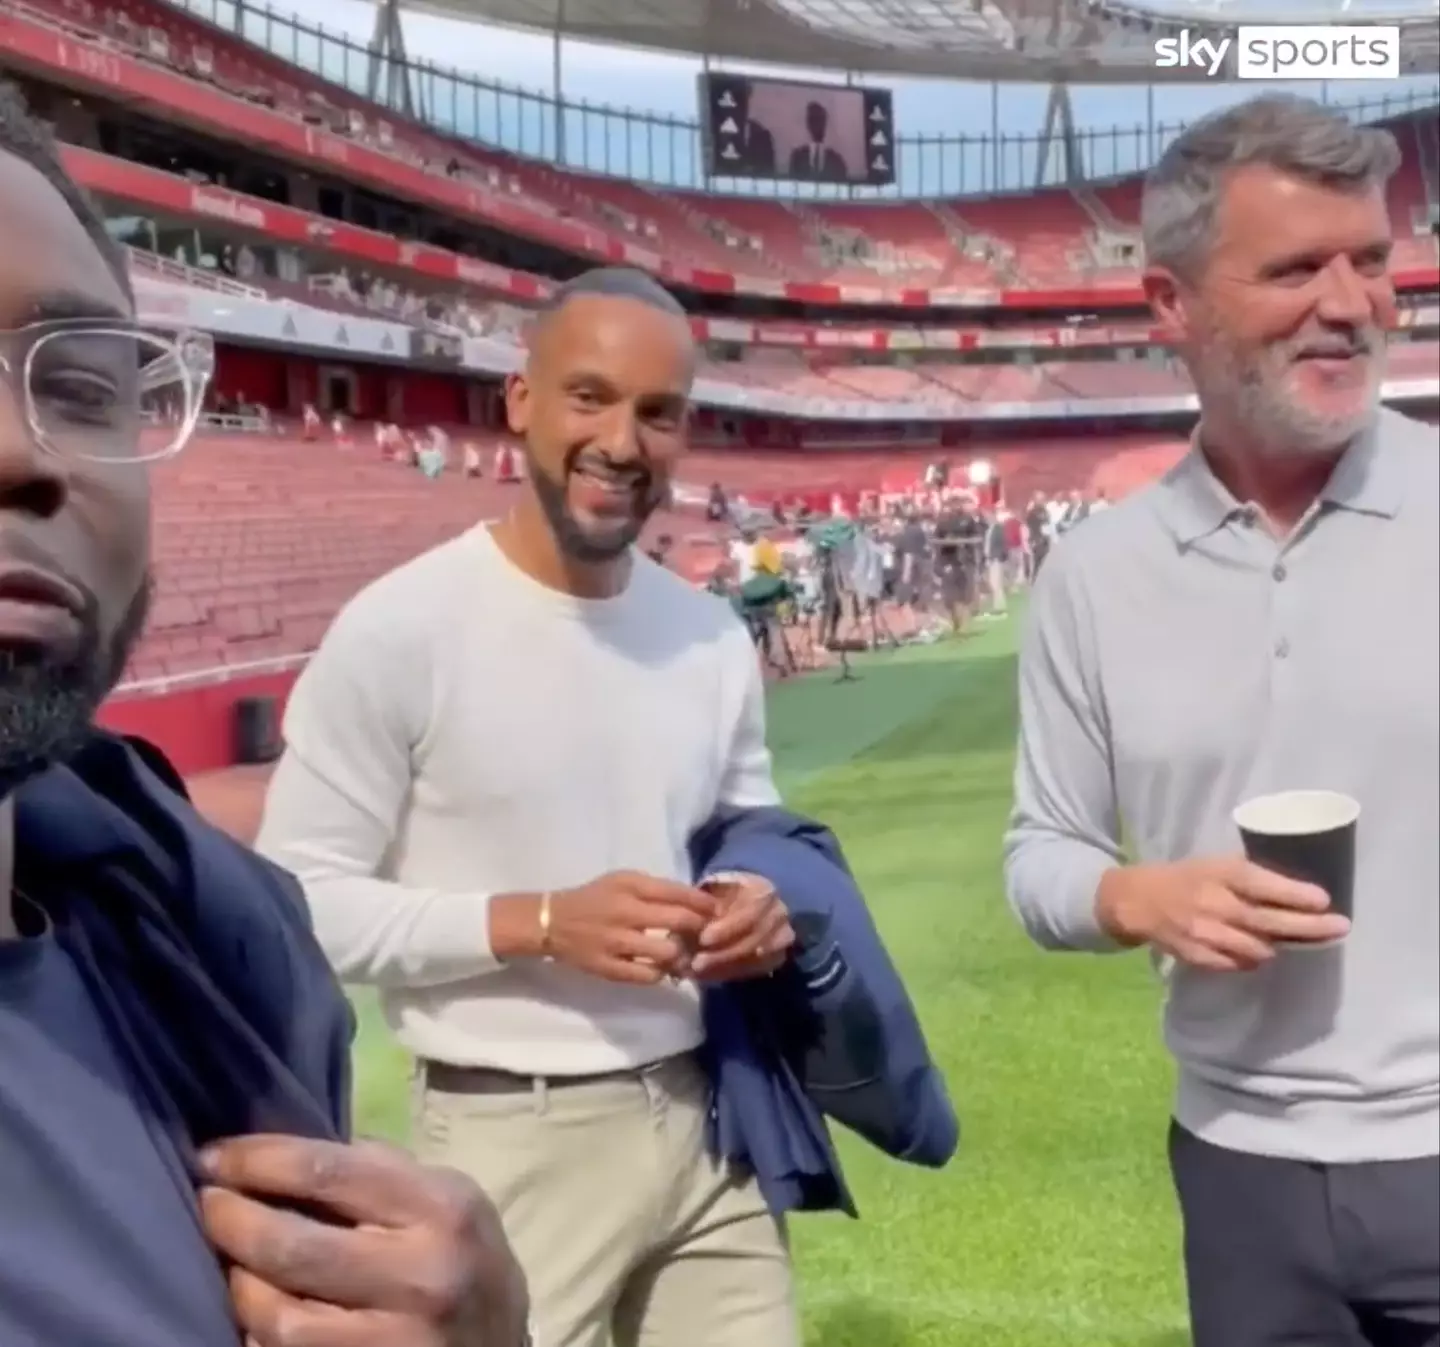 The video clip featuring the three former footballers has divided fans.